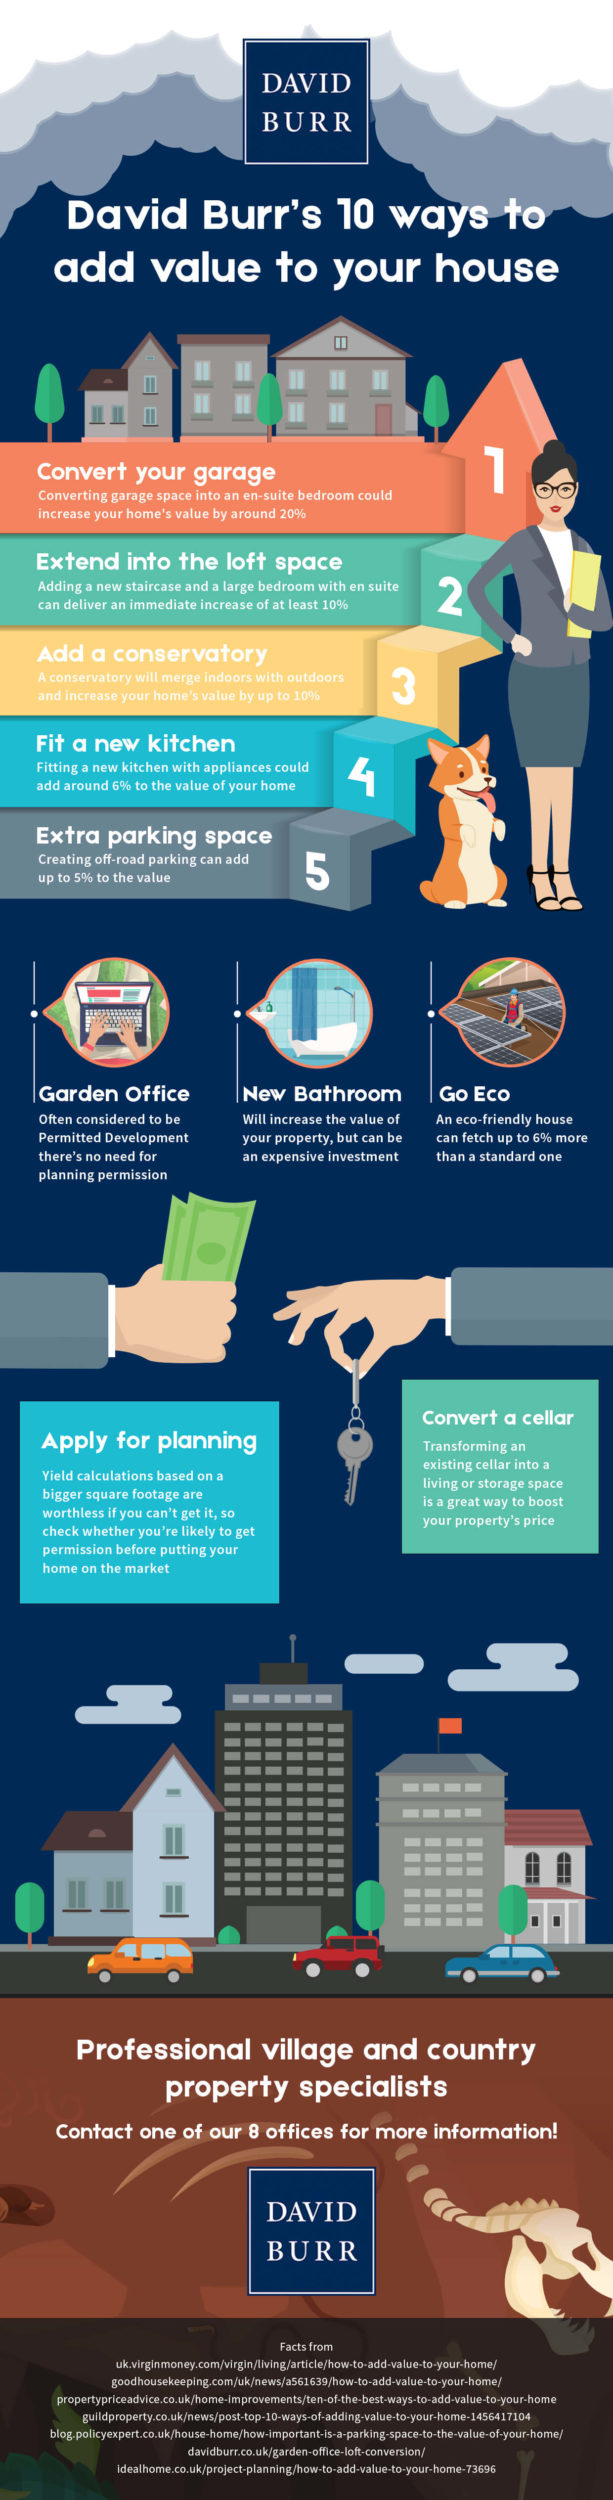 10 ways to add value to your home infographic